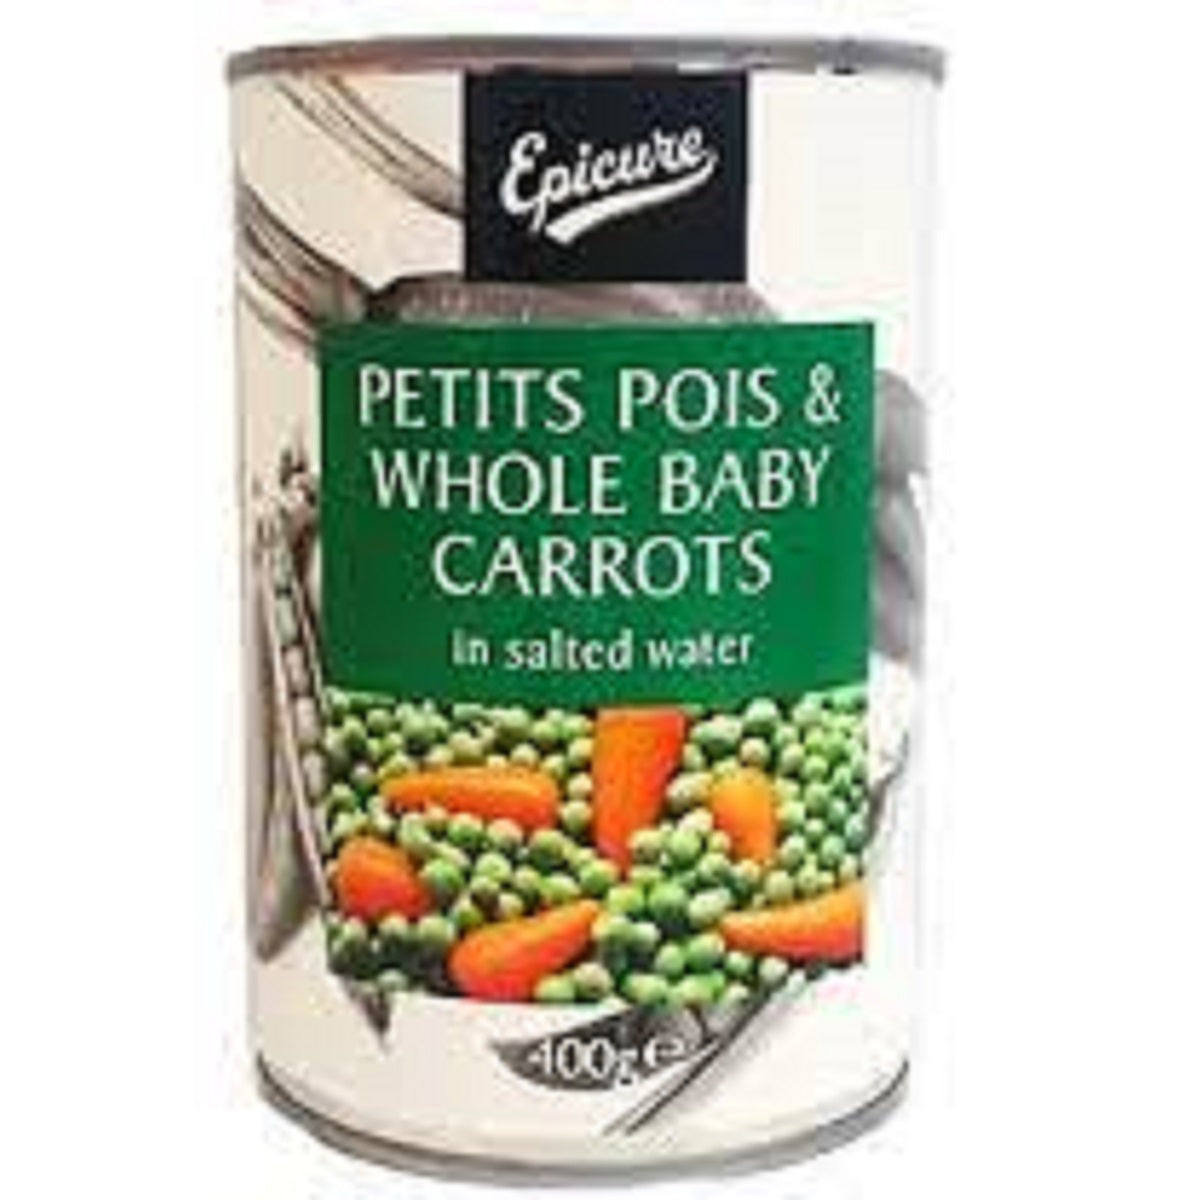 Epicure Petits Pois &amp; Whole Baby Carrots in Salted Water 400g